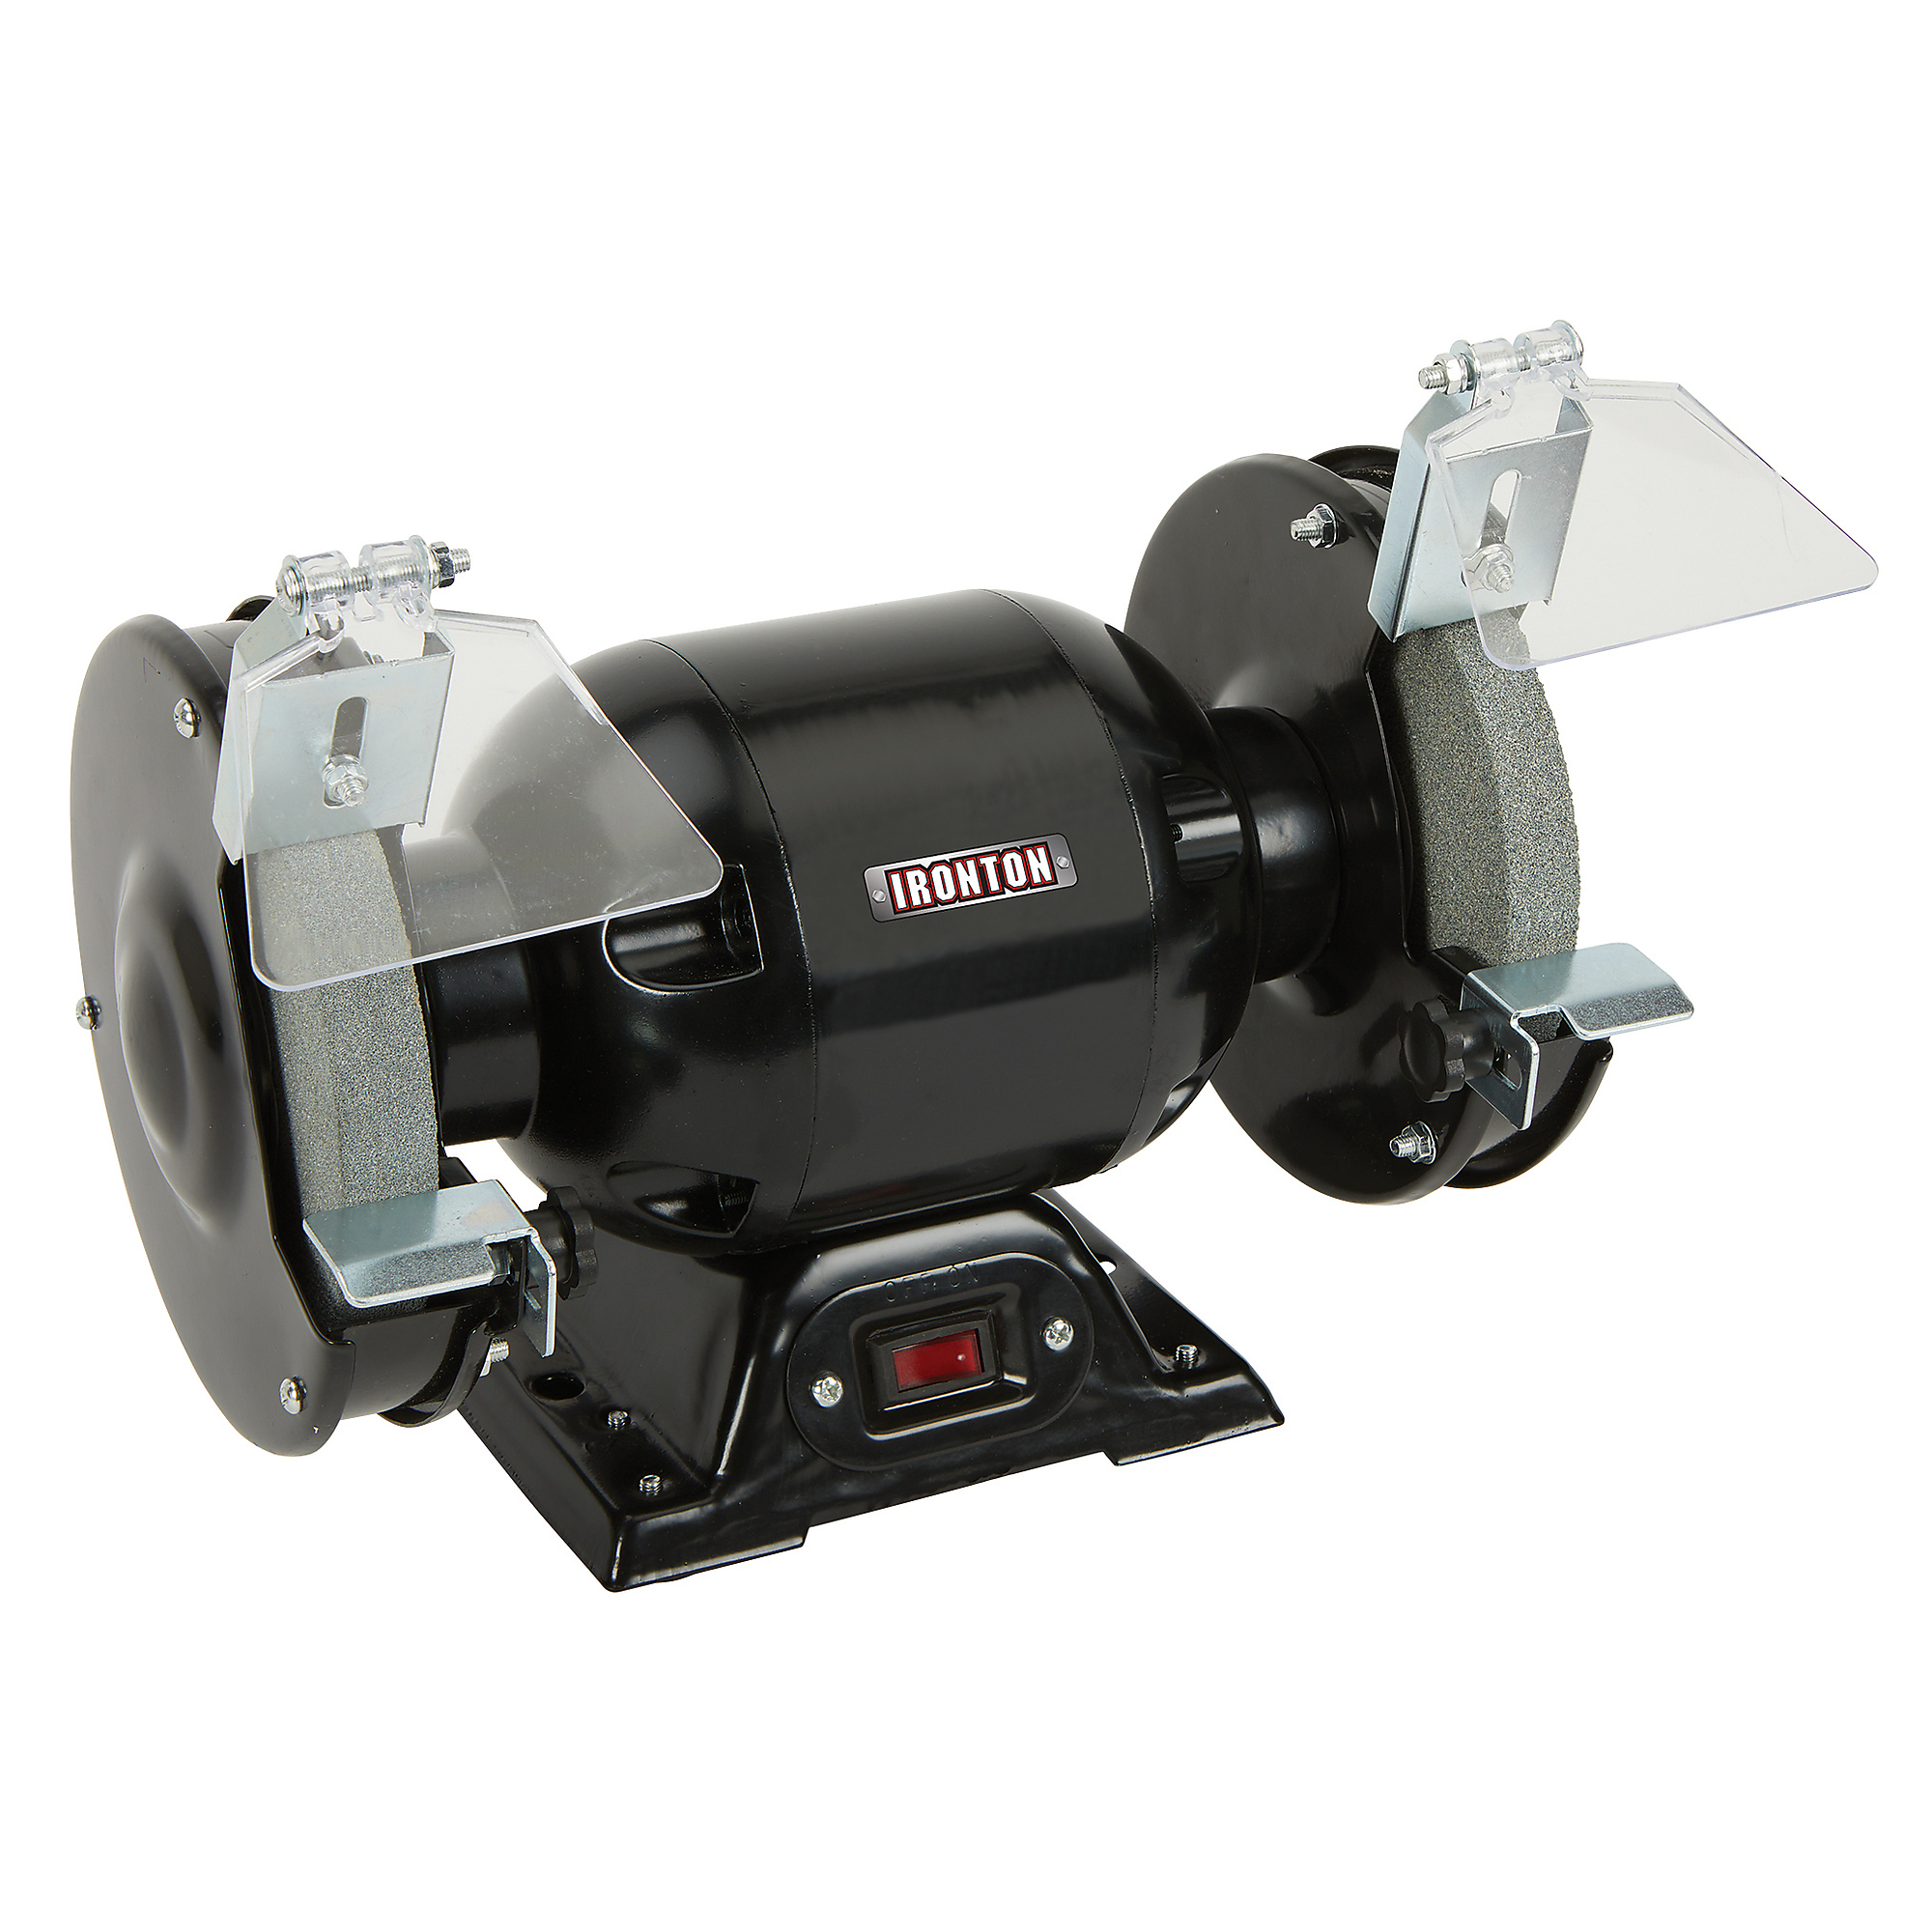 Ironton Benchtop Grinder with 6Inch Wheel, 2.1 Amps, 1/2 HP, 3560 RPM Max. Speed, Model BG115-6L